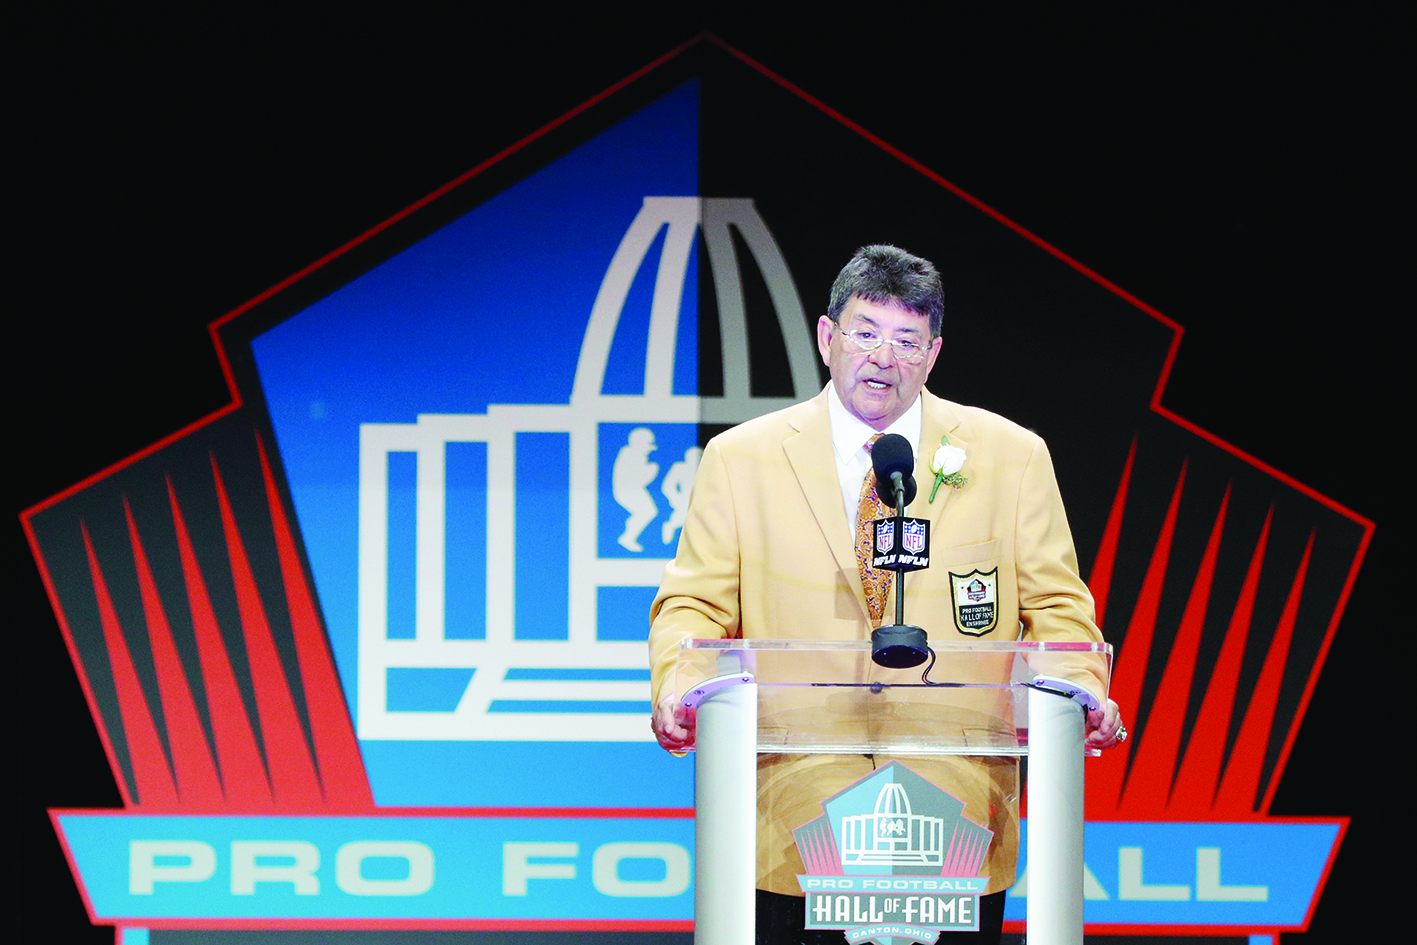 (FILES) In this file photo taken on August 6, 2016  Edward DeBartolo, Jr., former San Francisco 49ers Owner, speaks during his Pro Football Hall of Fame induction speech during the NFL Hall of Fame Enshrinement Ceremony at the Tom Benson Hall of Fame Stadium in Canton, Ohio. - US President Donald Trump on February 18, 2020 in Washington, DC, granted a full pardon to the former San Francisco 49ers owner convicted in a gambling fraud scandal. DeBartolo Jr., whose San Francisco 49ers won five Super Bowls under his leadership, stepped down as owner in 1997 after two Louisiana newspapers reported he would be indicted for gambling fraud. The White House announced the surprise decision on Tuesday, along with NFL greats Jerry Rice, Jim Brown, Ronnie Lott and Charles Haley. (Photo by Joe Robbins / GETTY IMAGES NORTH AMERICA / AFP)